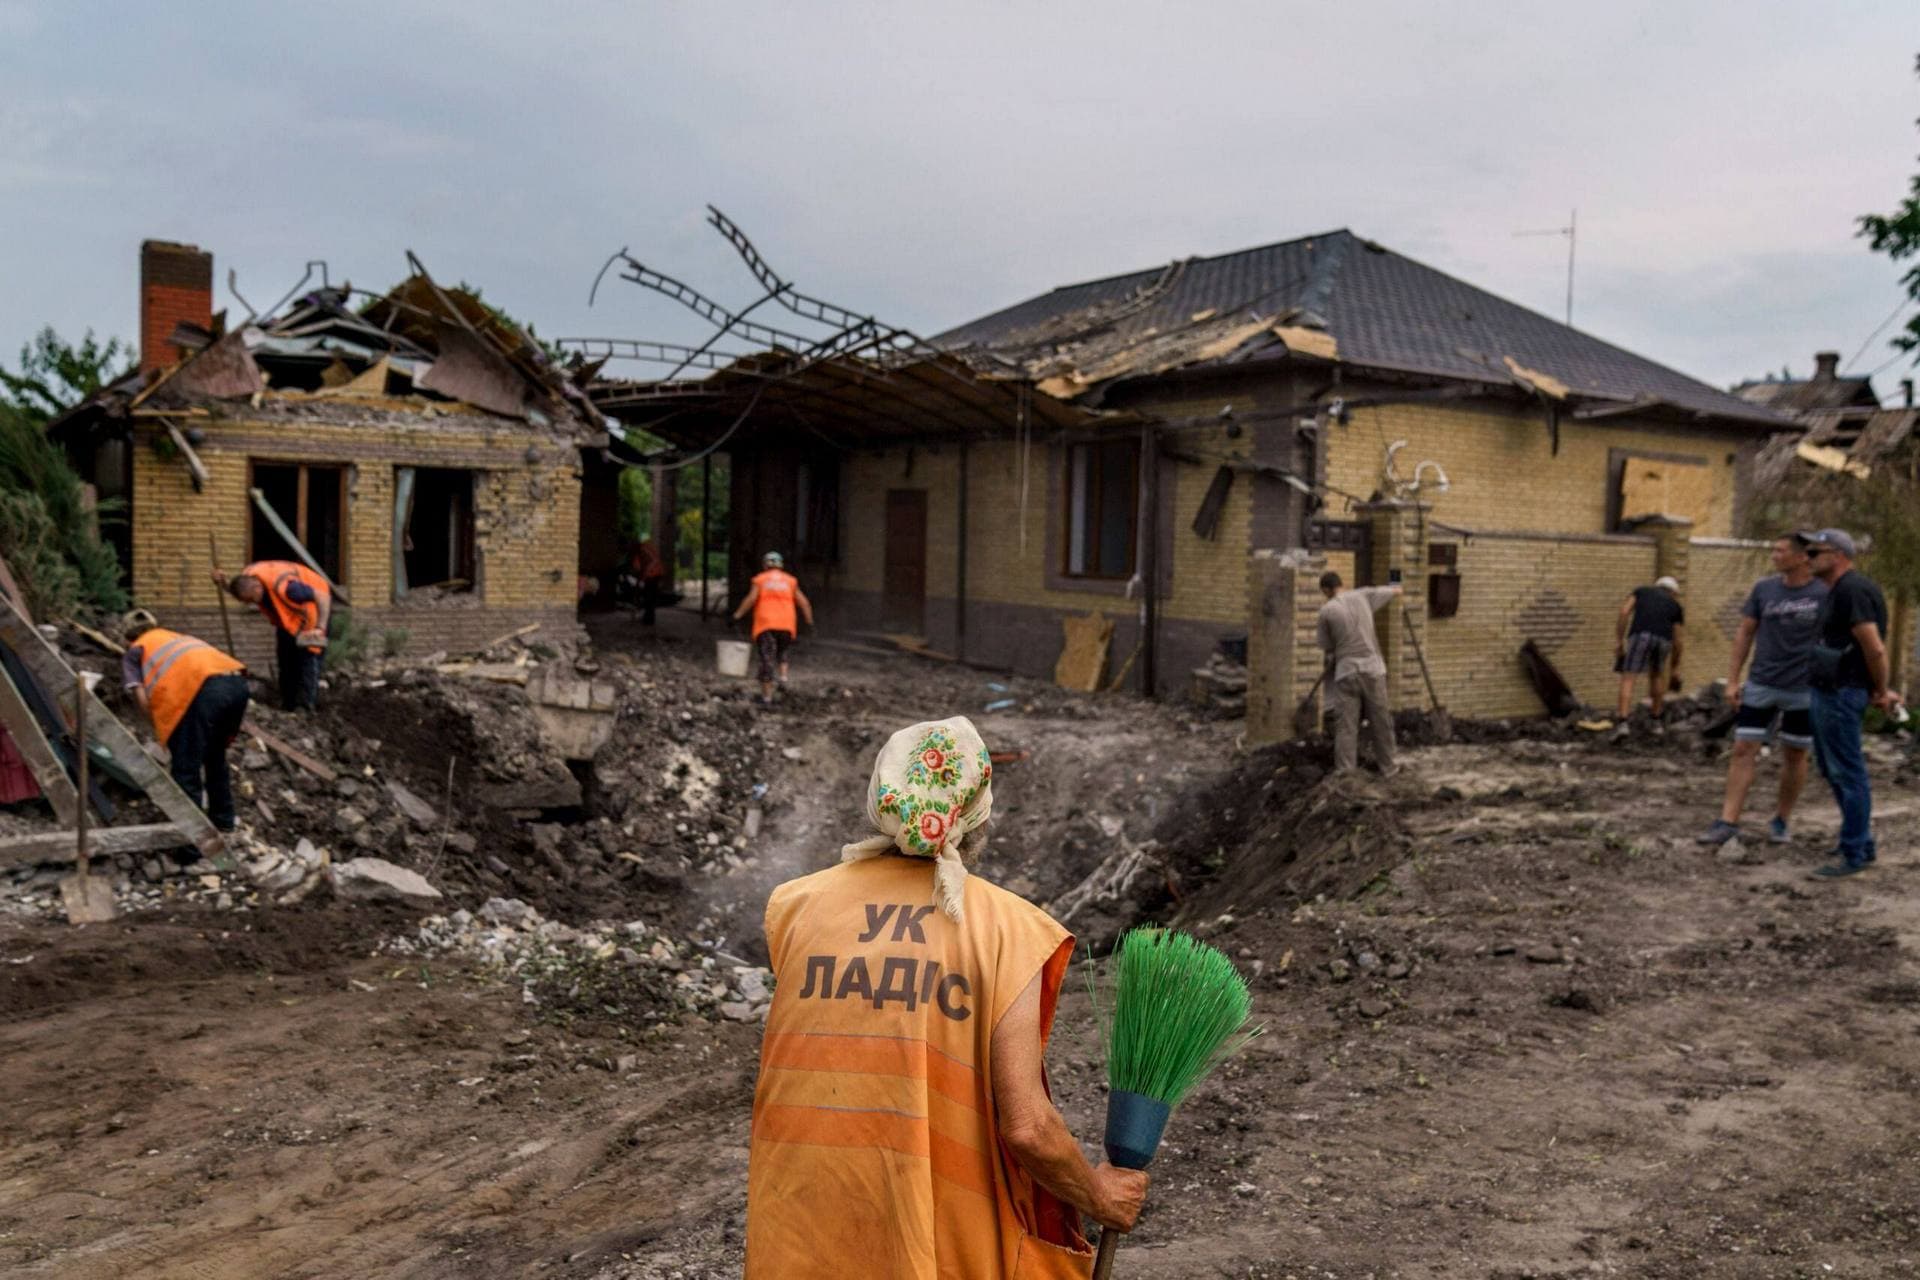 An elderly worker with a broom inspects a crater caused by a rocket strike on a house in Kramatorsk